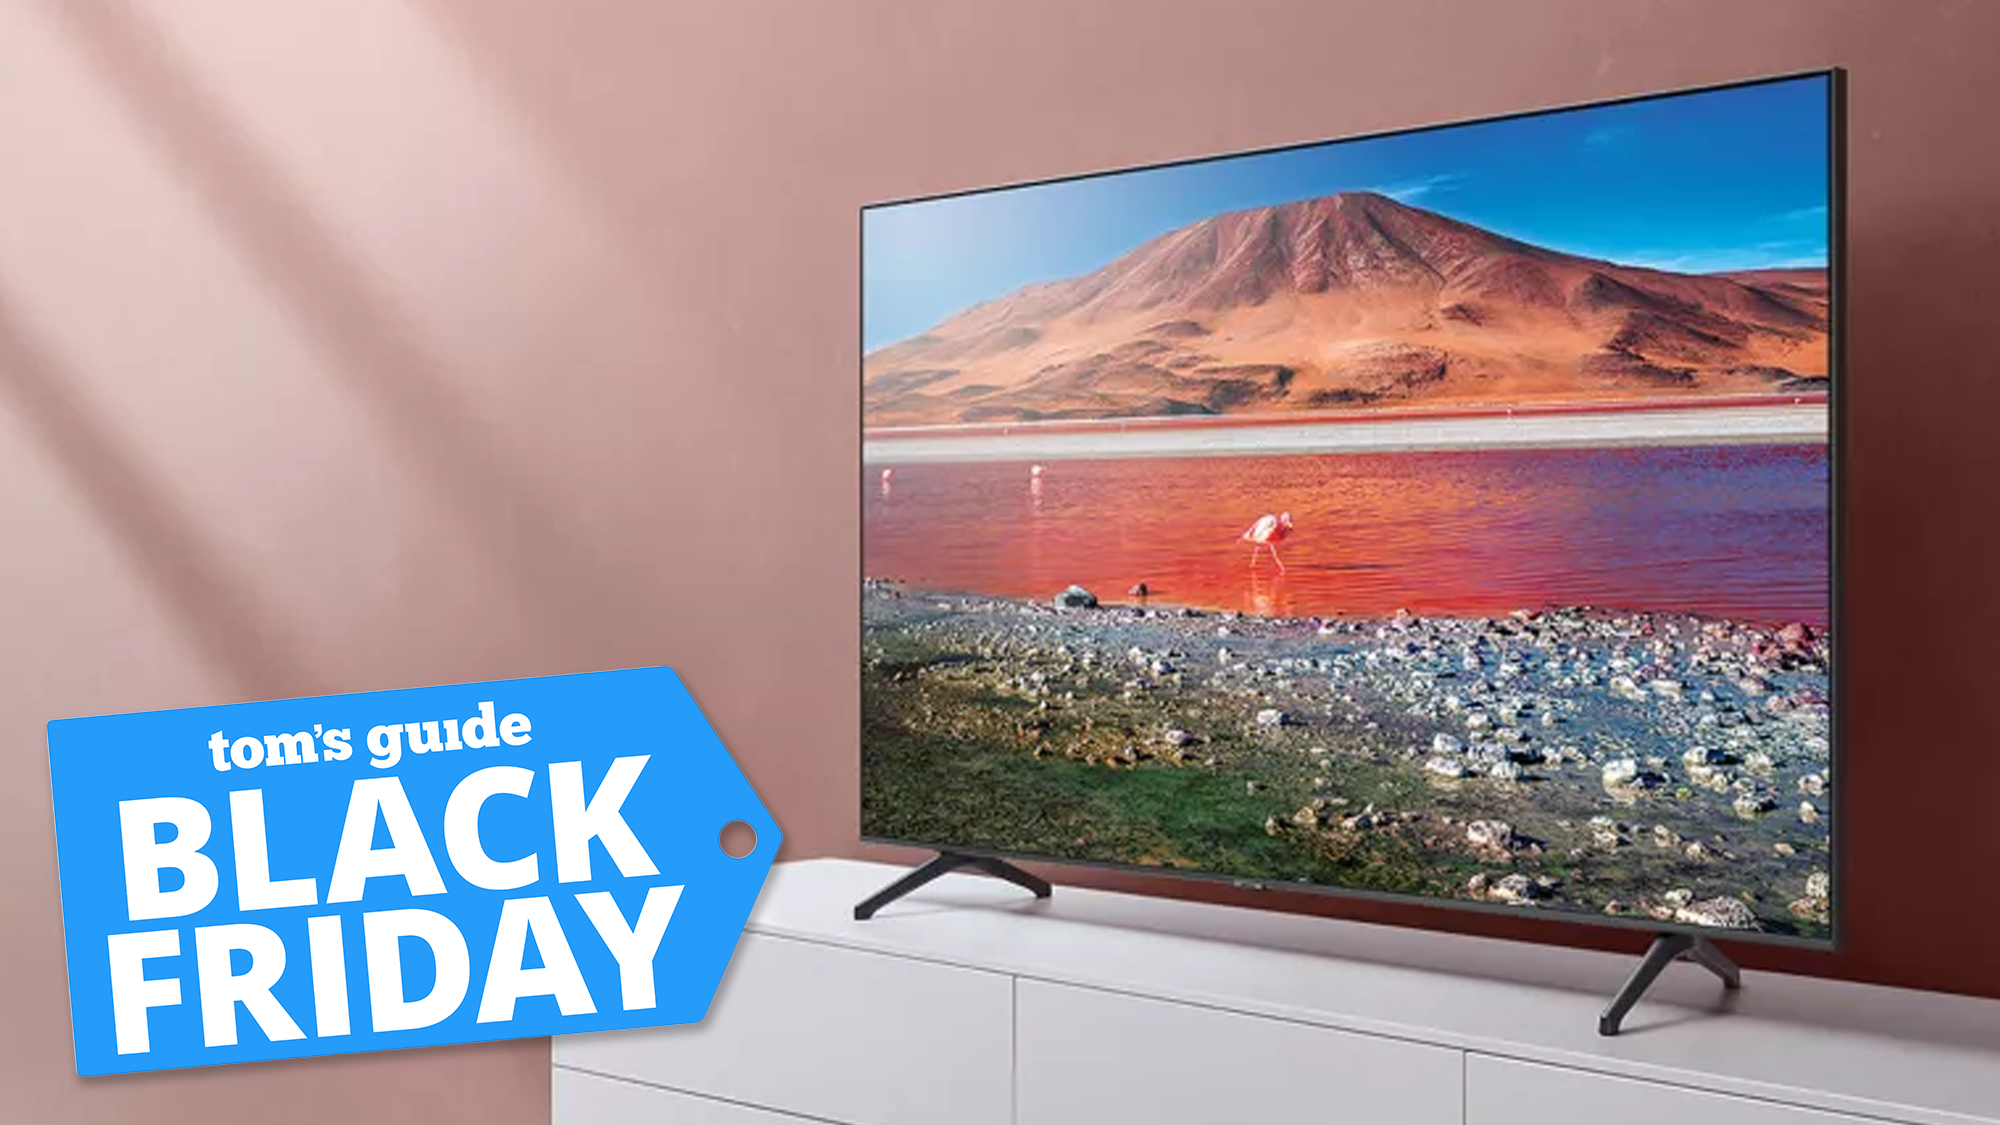 Walmart Black Friday Tv Deals Just Went Live Including This 55-inch Samsung For 478 Toms Guide